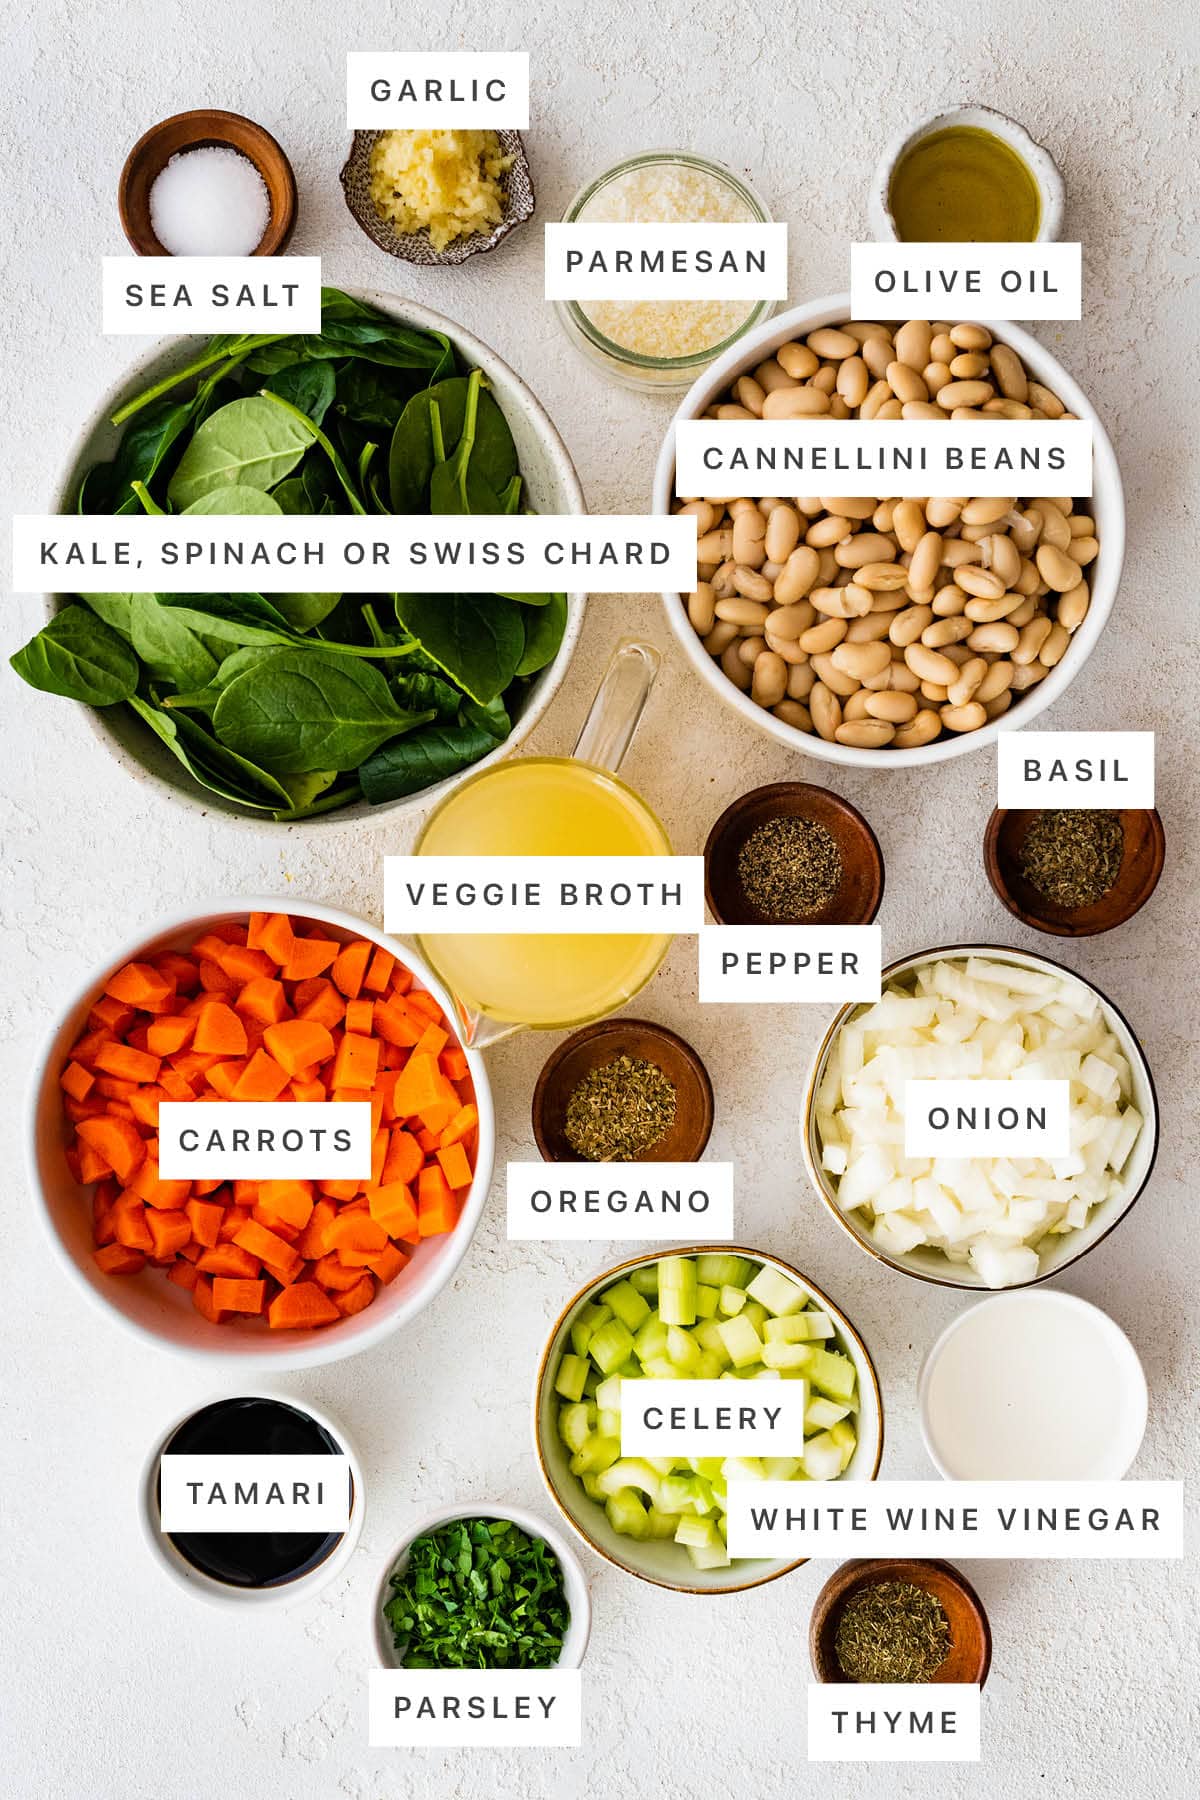 Ingredients measured out to make Mediterranean White Bean Soup: sea salt, garlic, parmesan, olive oil, cannellini beans, spinach, veggie broth, pepper, basil, carrots, oregano, onion, celery, white wine vinegar, tamari, parsley and thyme.